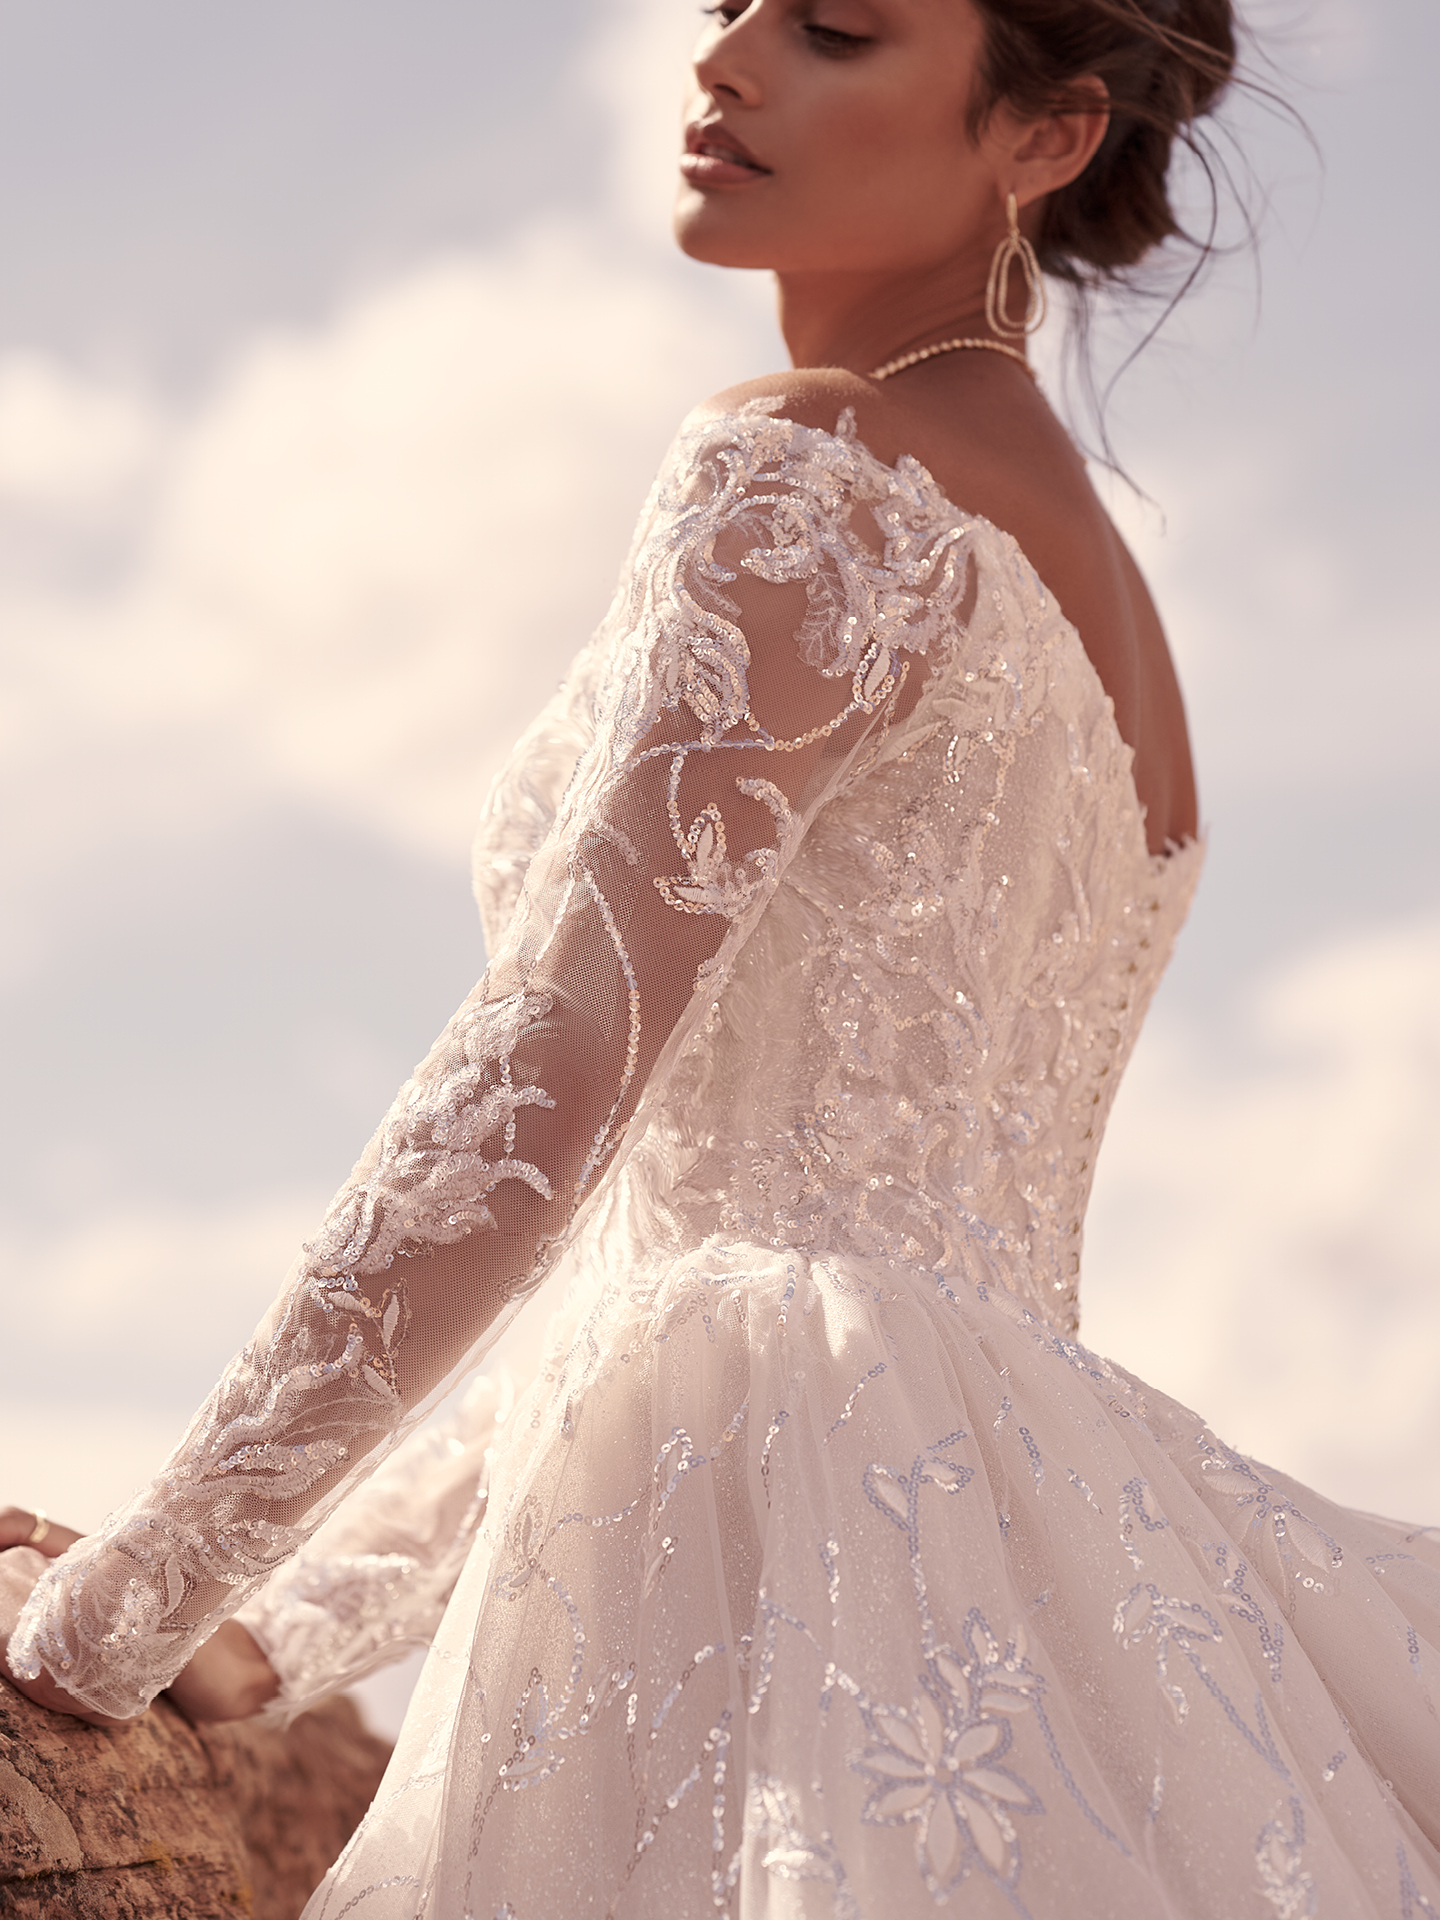 Bride In Tulle Wedding Dress Called Seneca By Sottero And Midgley